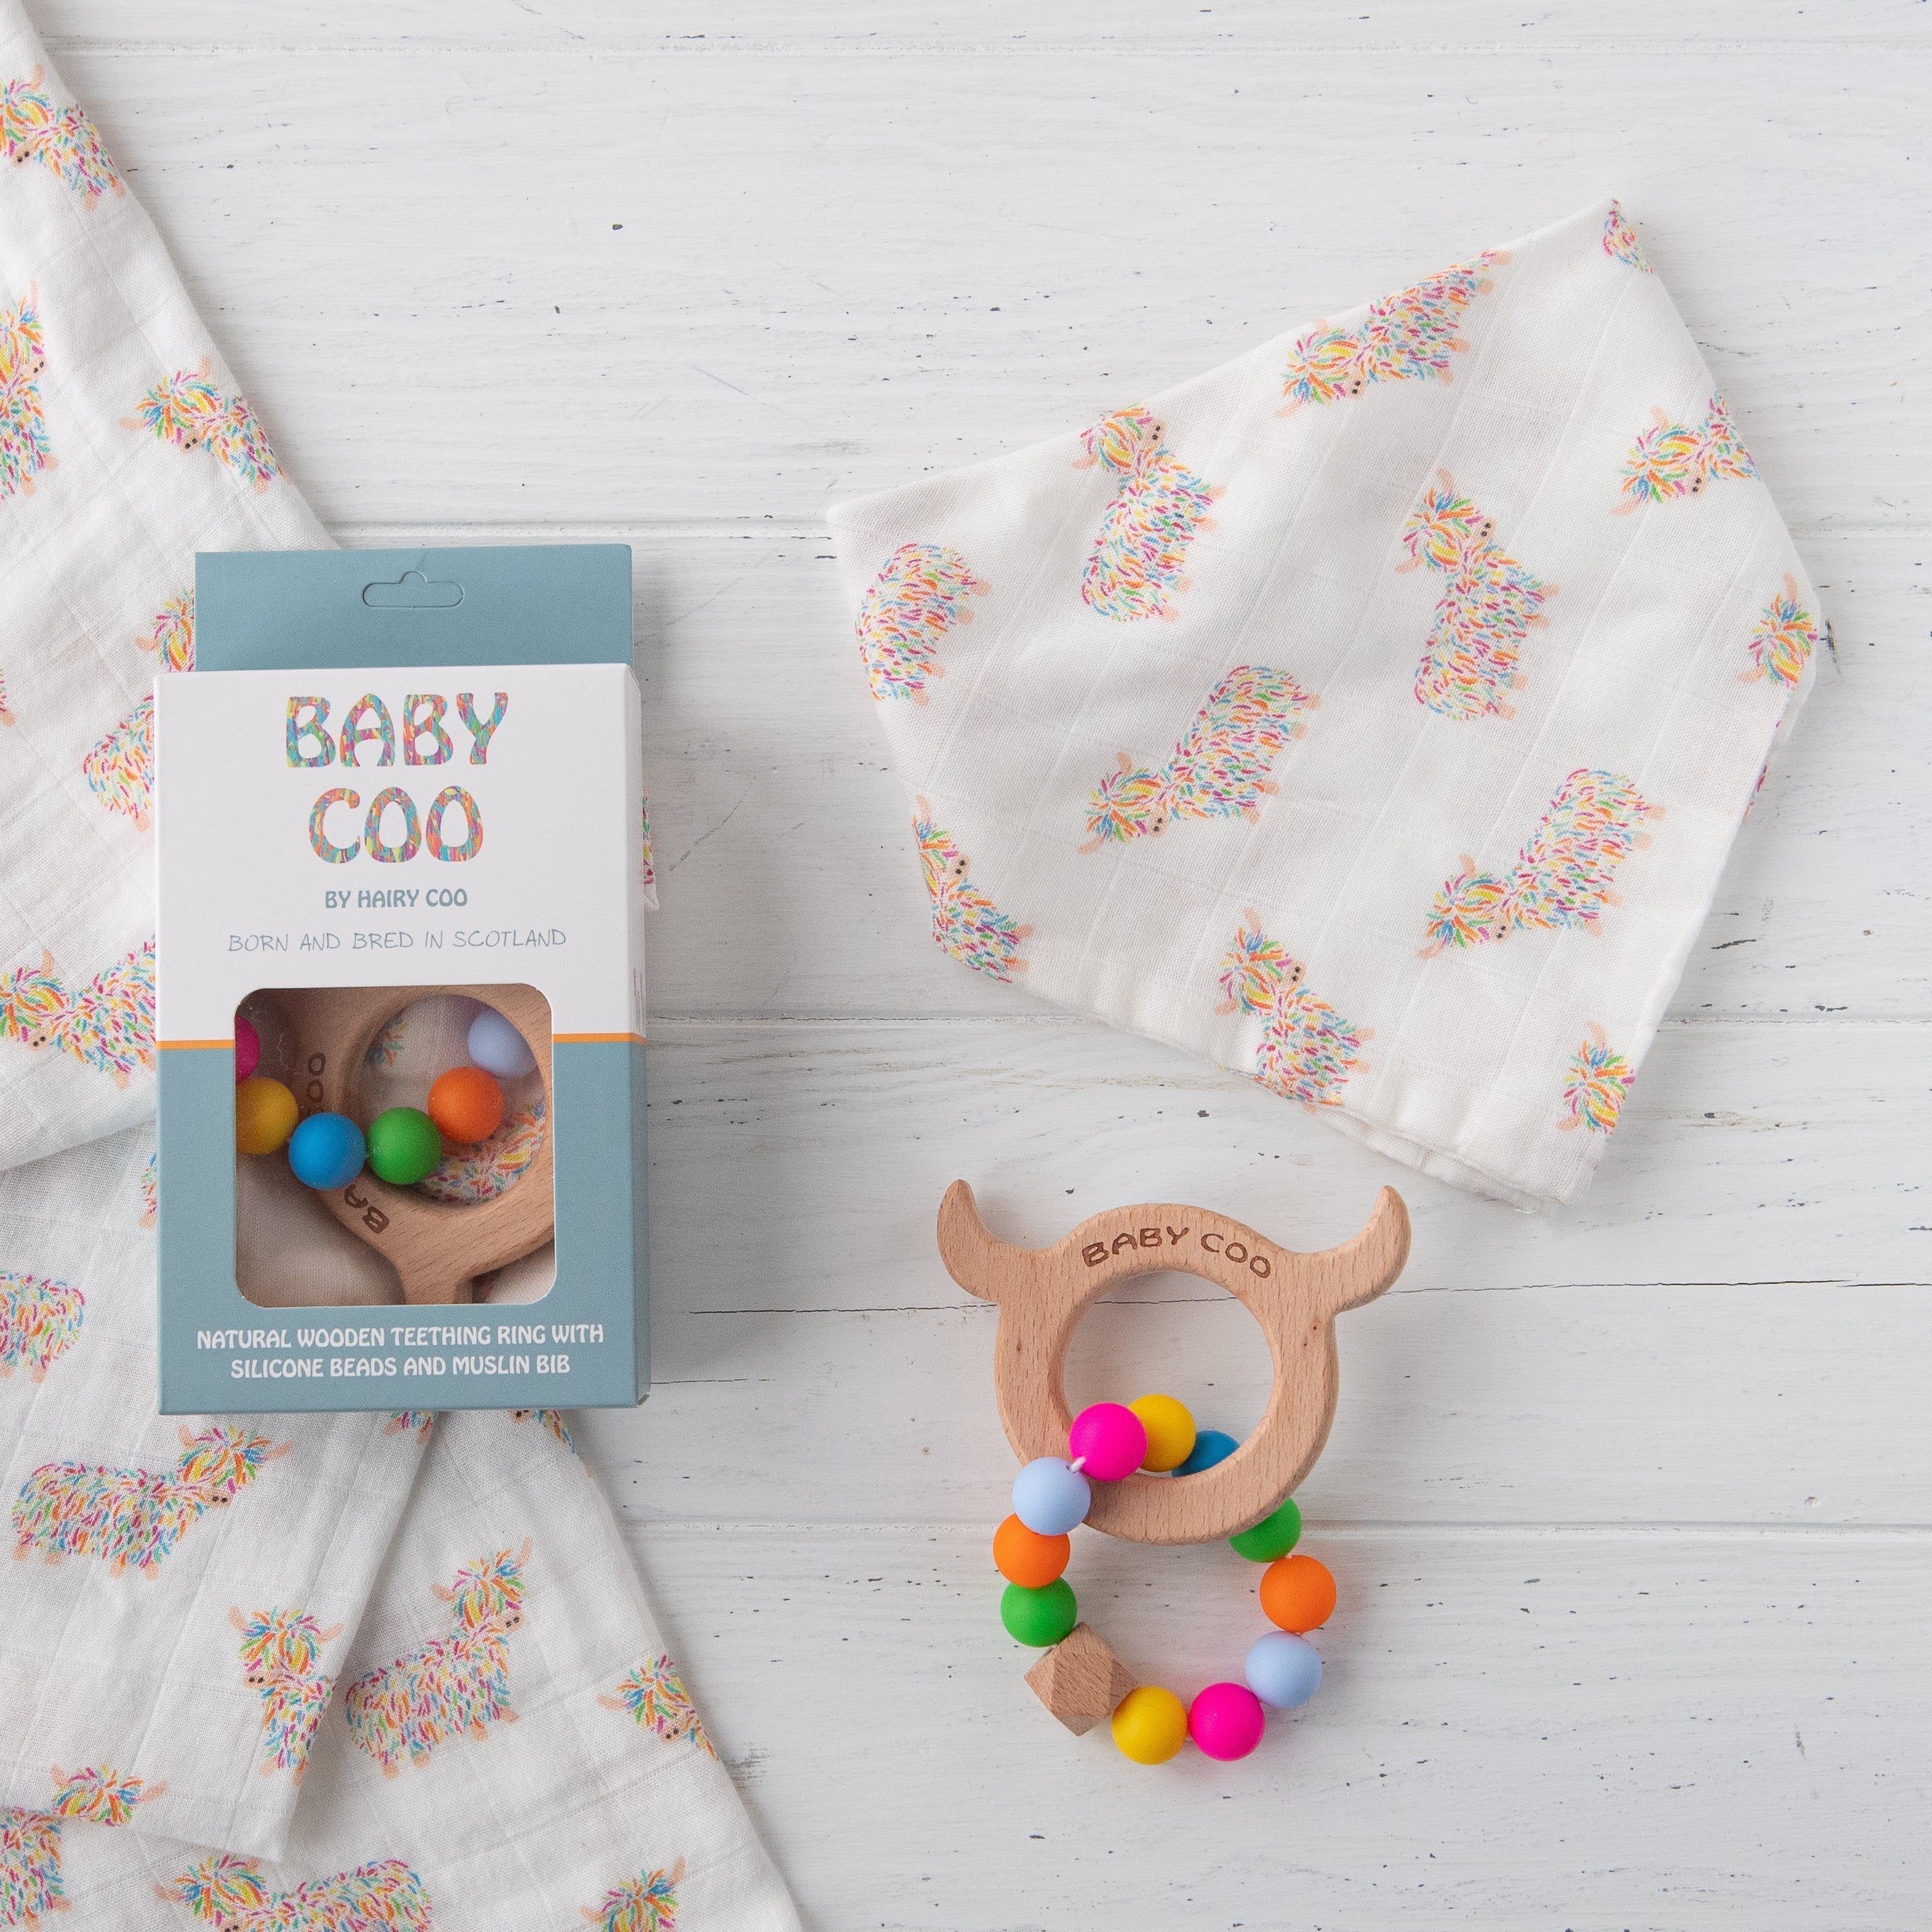 Baby Coo Teething Set | Hairy Coo | Scottish Creations